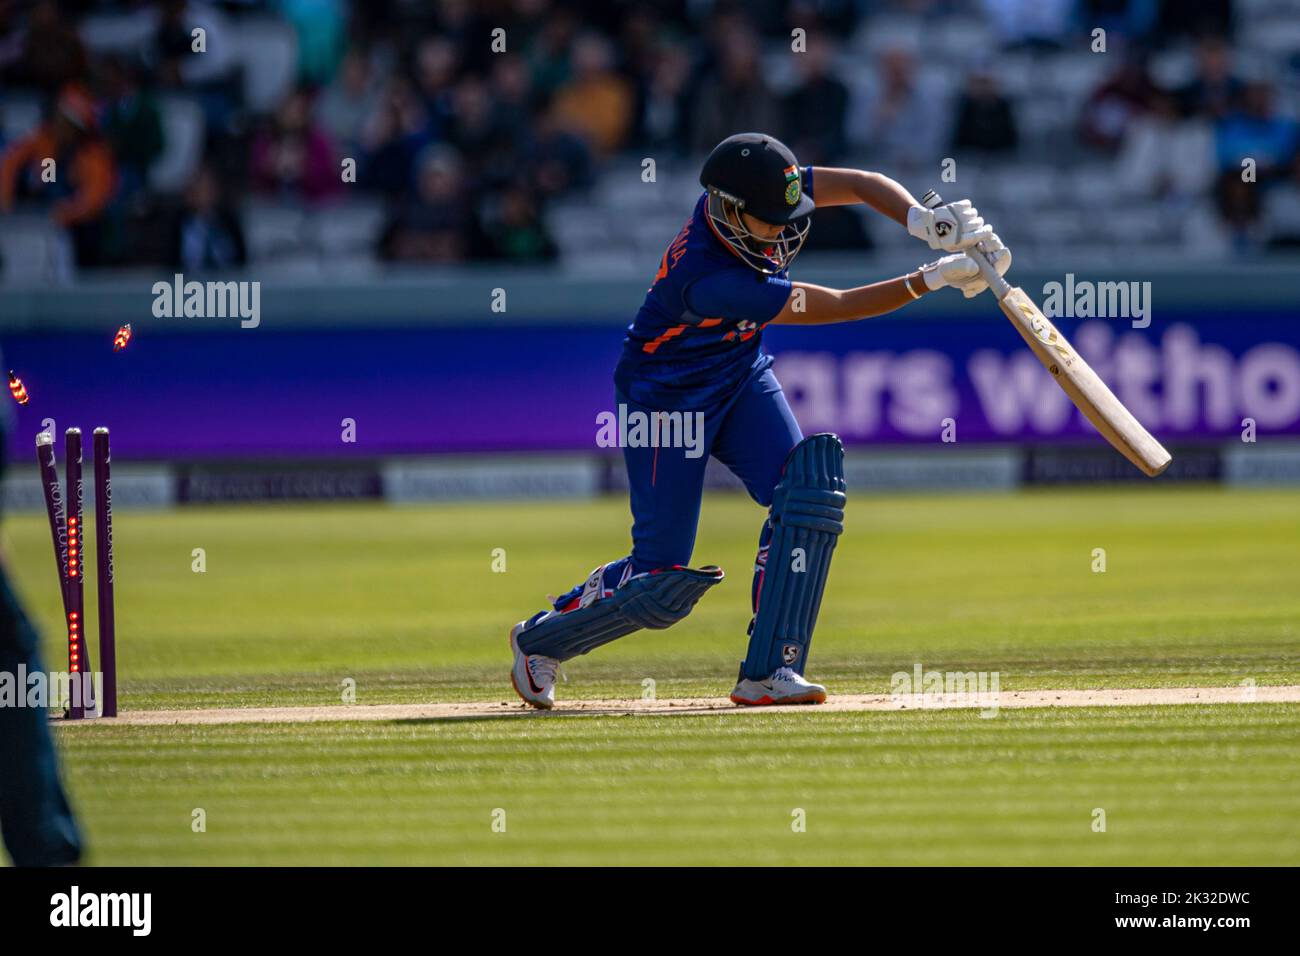 LONDON, UNITED KINGDOM. 24th September, 2022. in17 bowled byKate Cross of England during England Women vs India 3rd Royal London ODI at The Lord's Cricket Ground on Saturday, September 24, 2022 in LONDON ENGLAND.  Credit: Taka G Wu/Alamy Live News Stock Photo